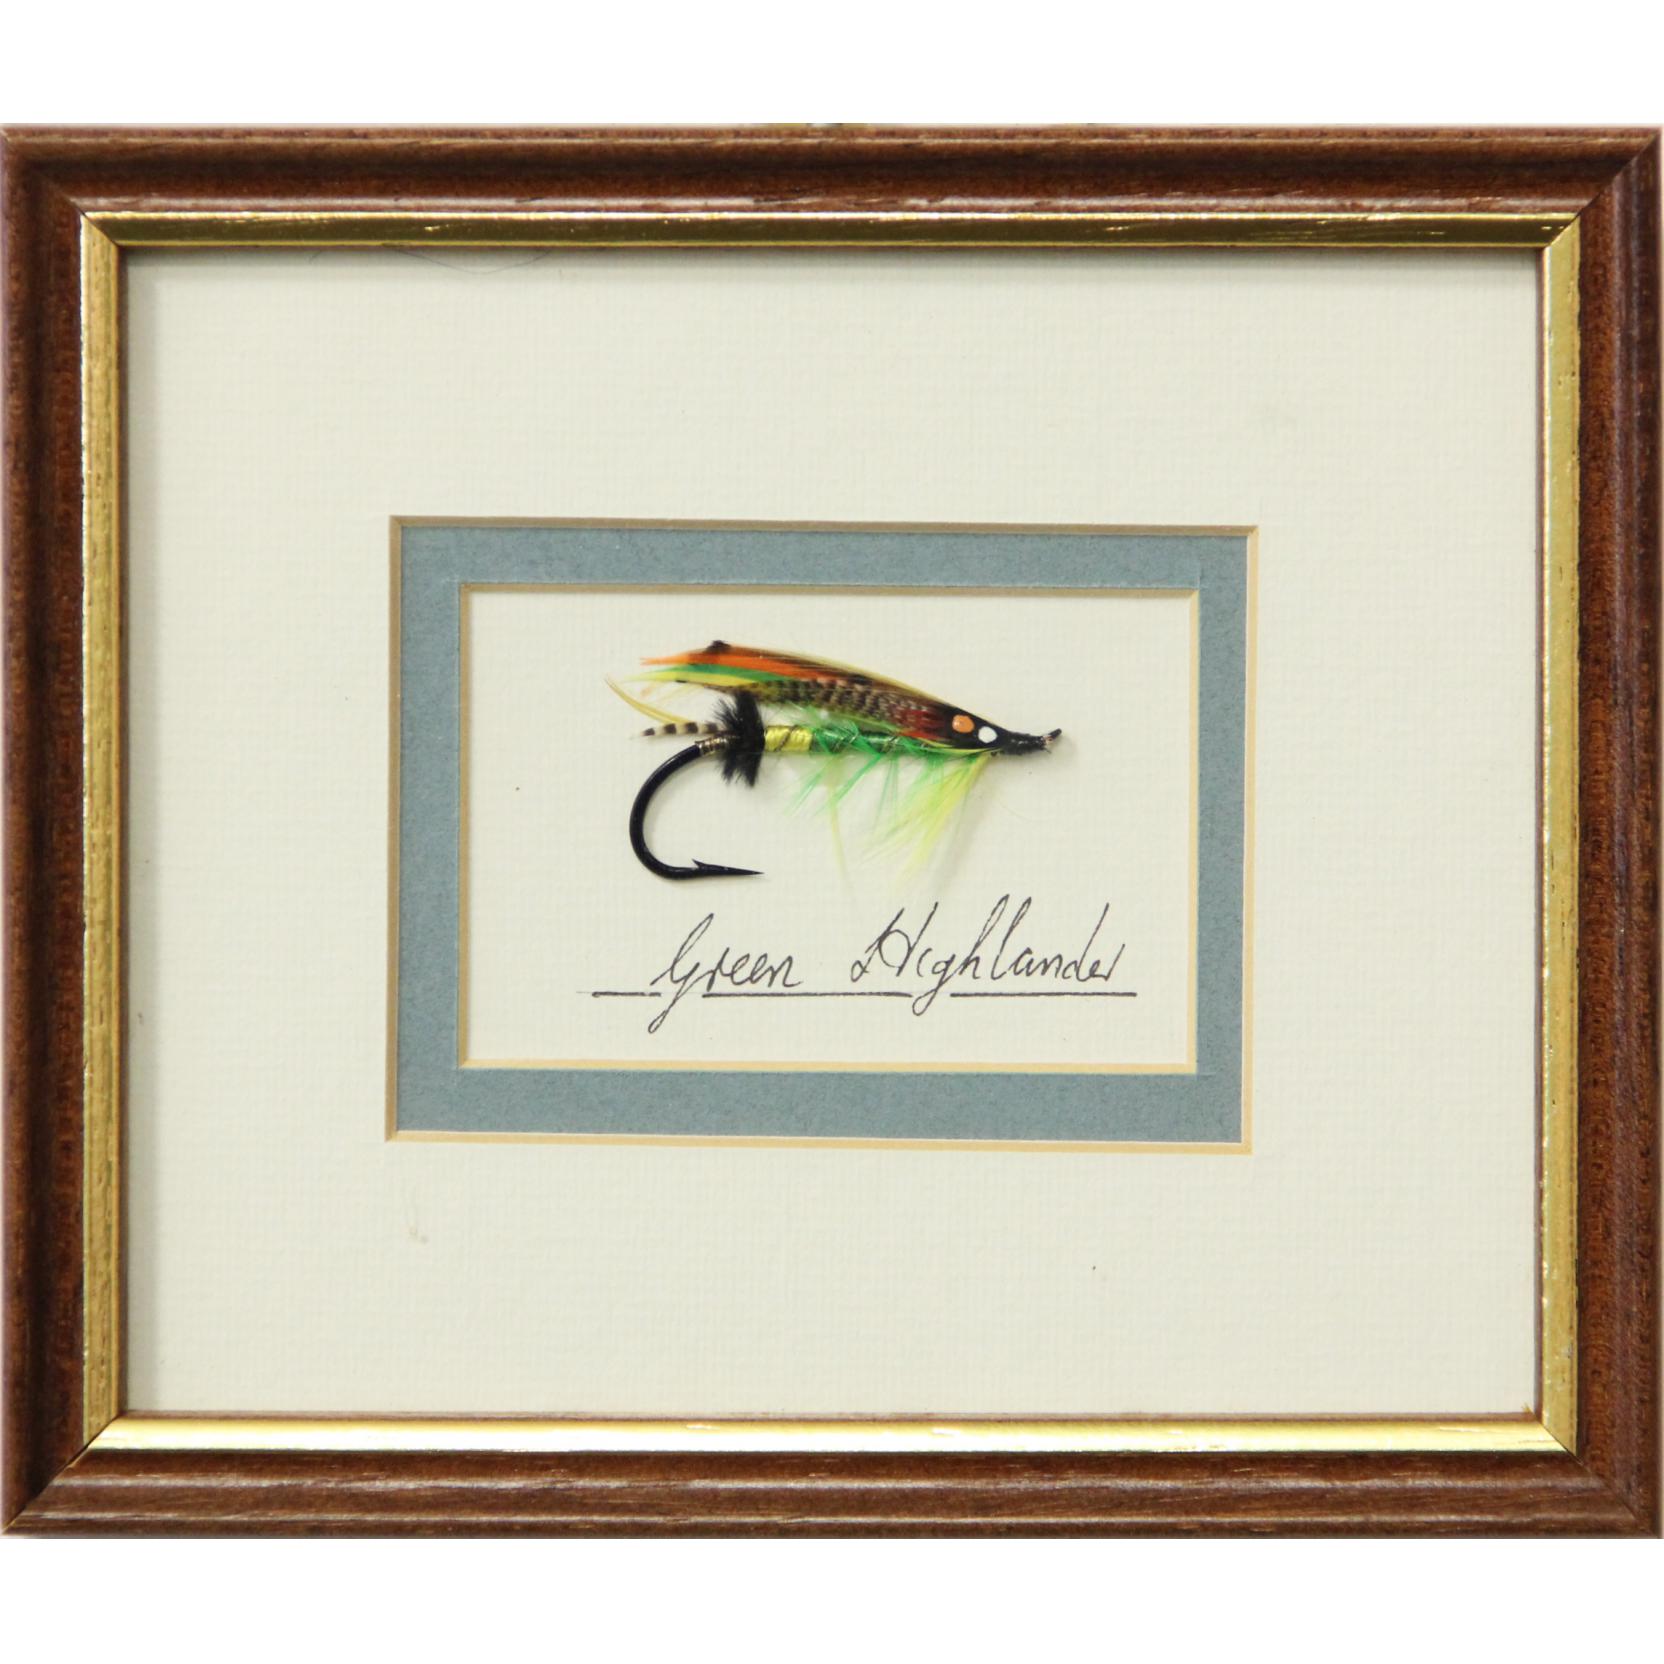 Seven Frame Collection of Mounted Fishing Flies (Lot 232 - The